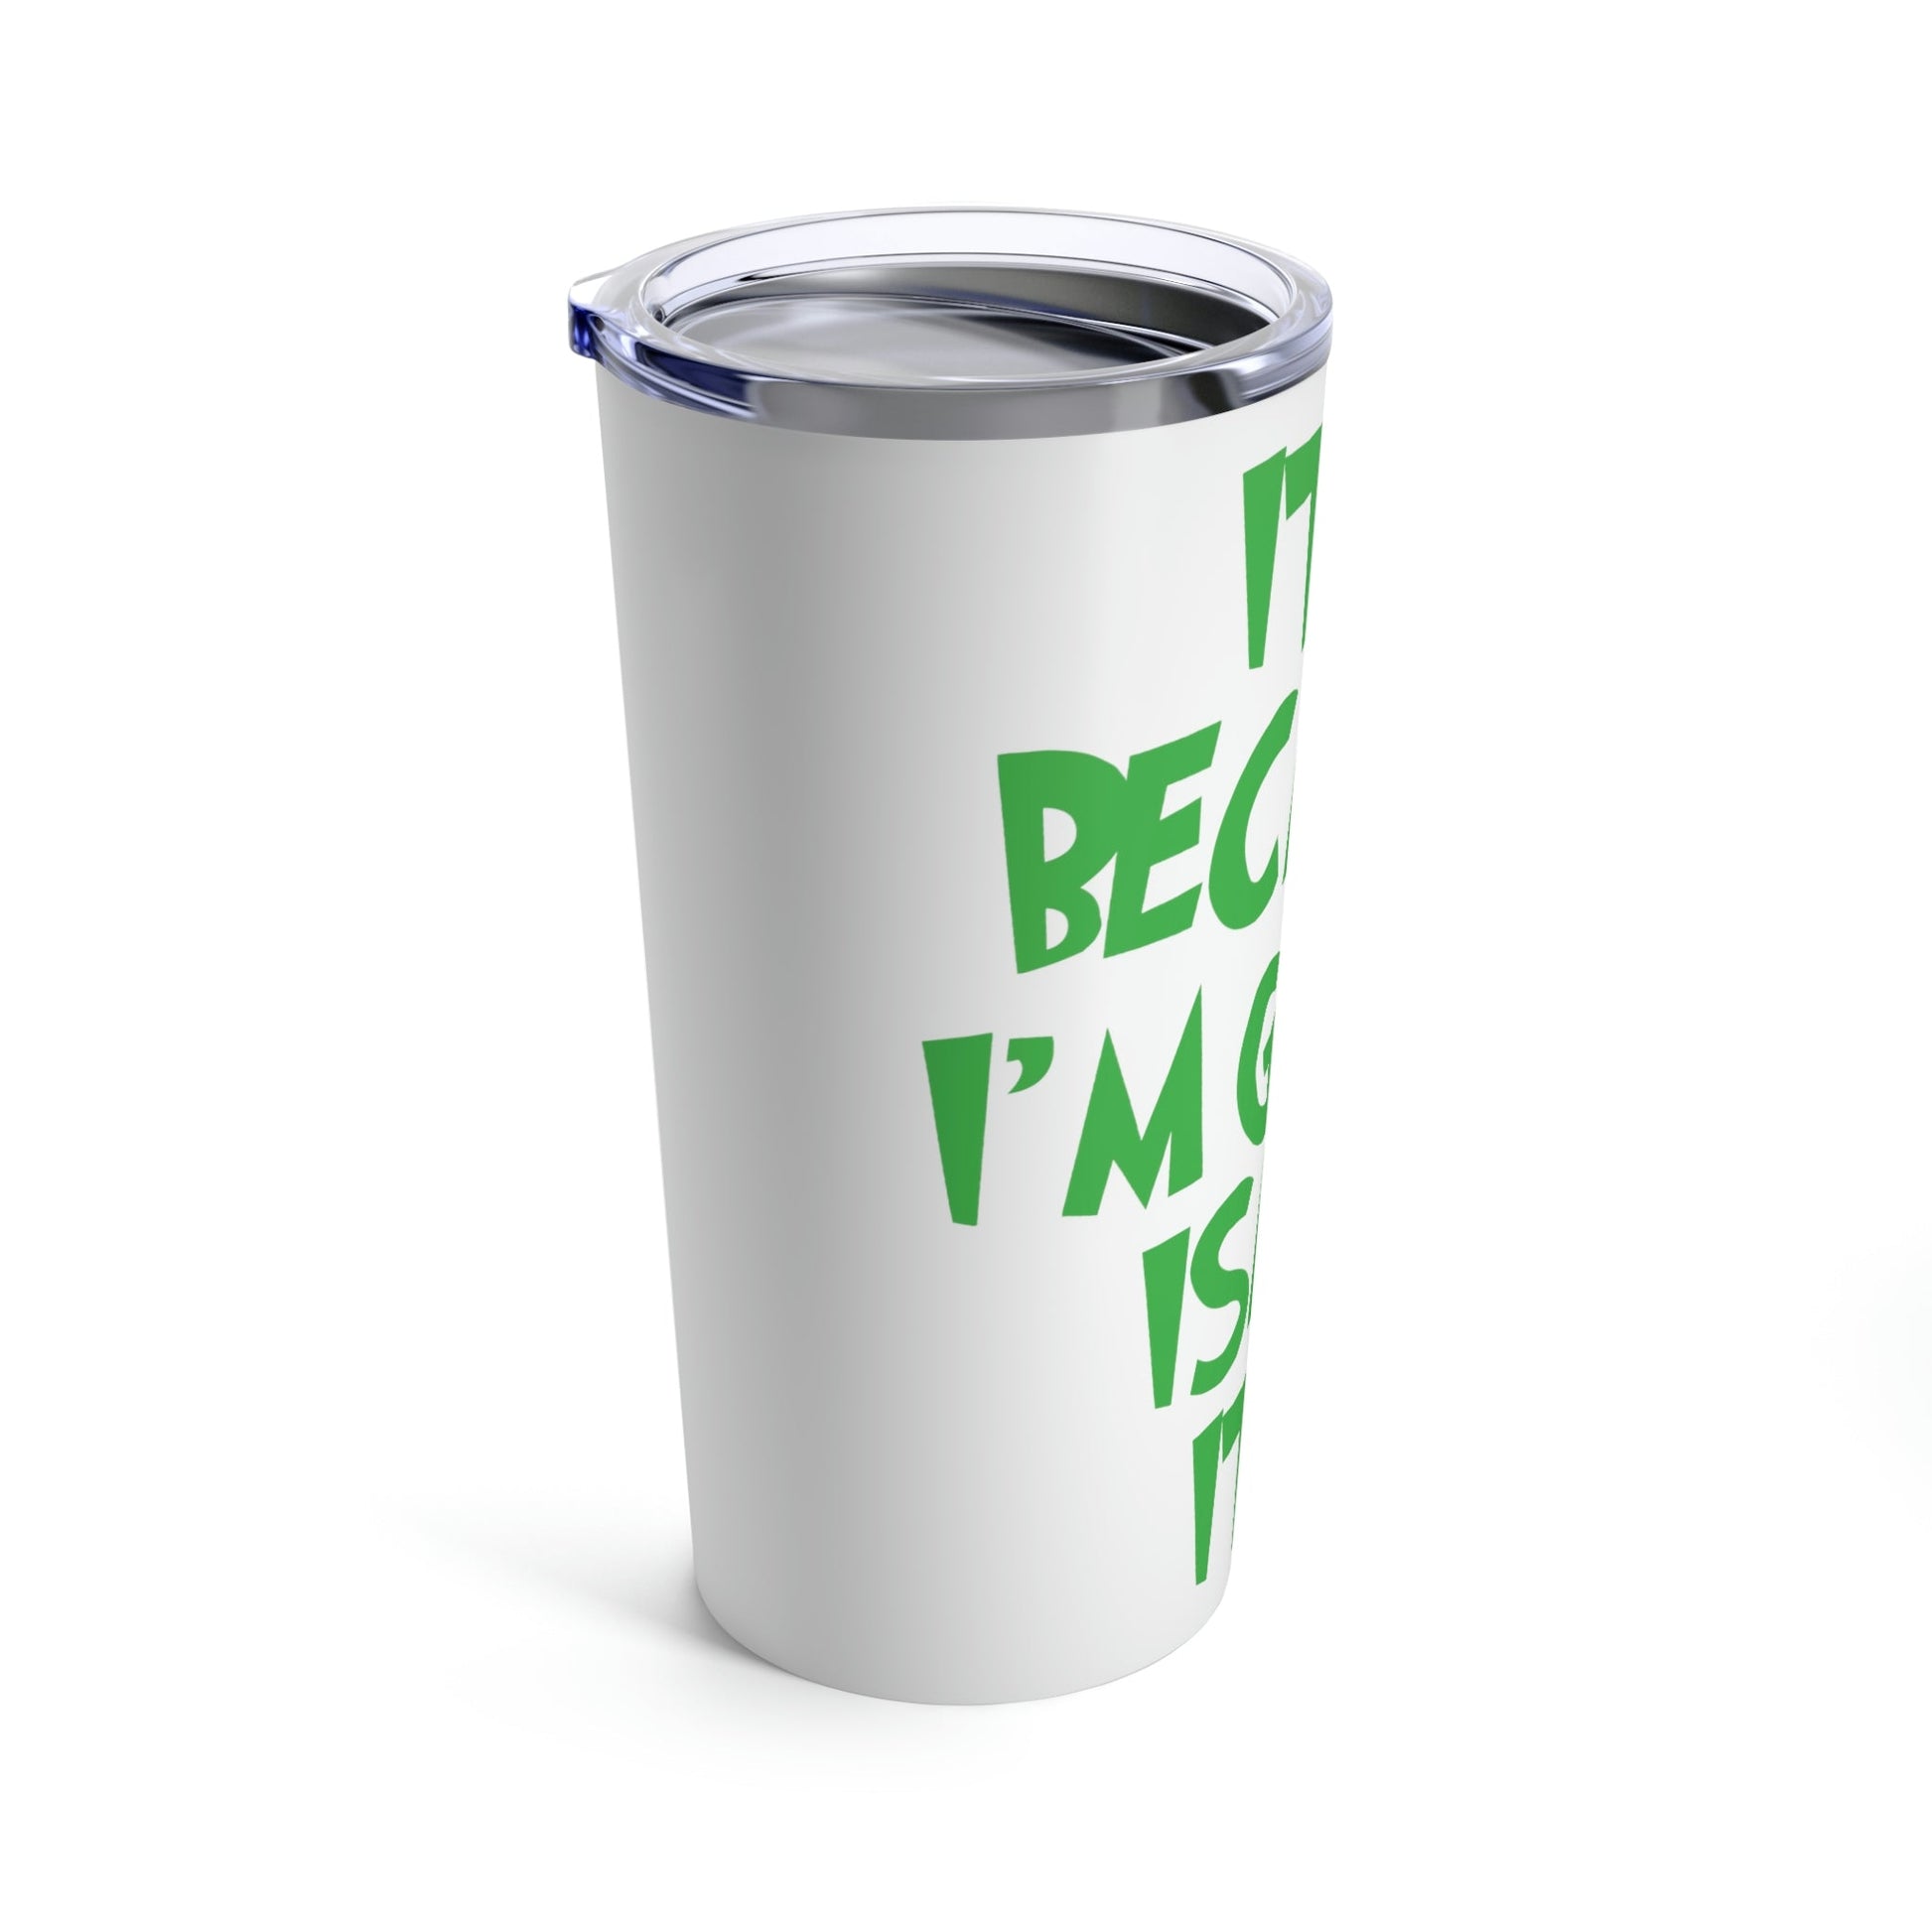 It's Because I'm Green Funny Quotes Humor Stainless Steel Hot or Cold Vacuum Tumbler 20oz Ichaku [Perfect Gifts Selection]